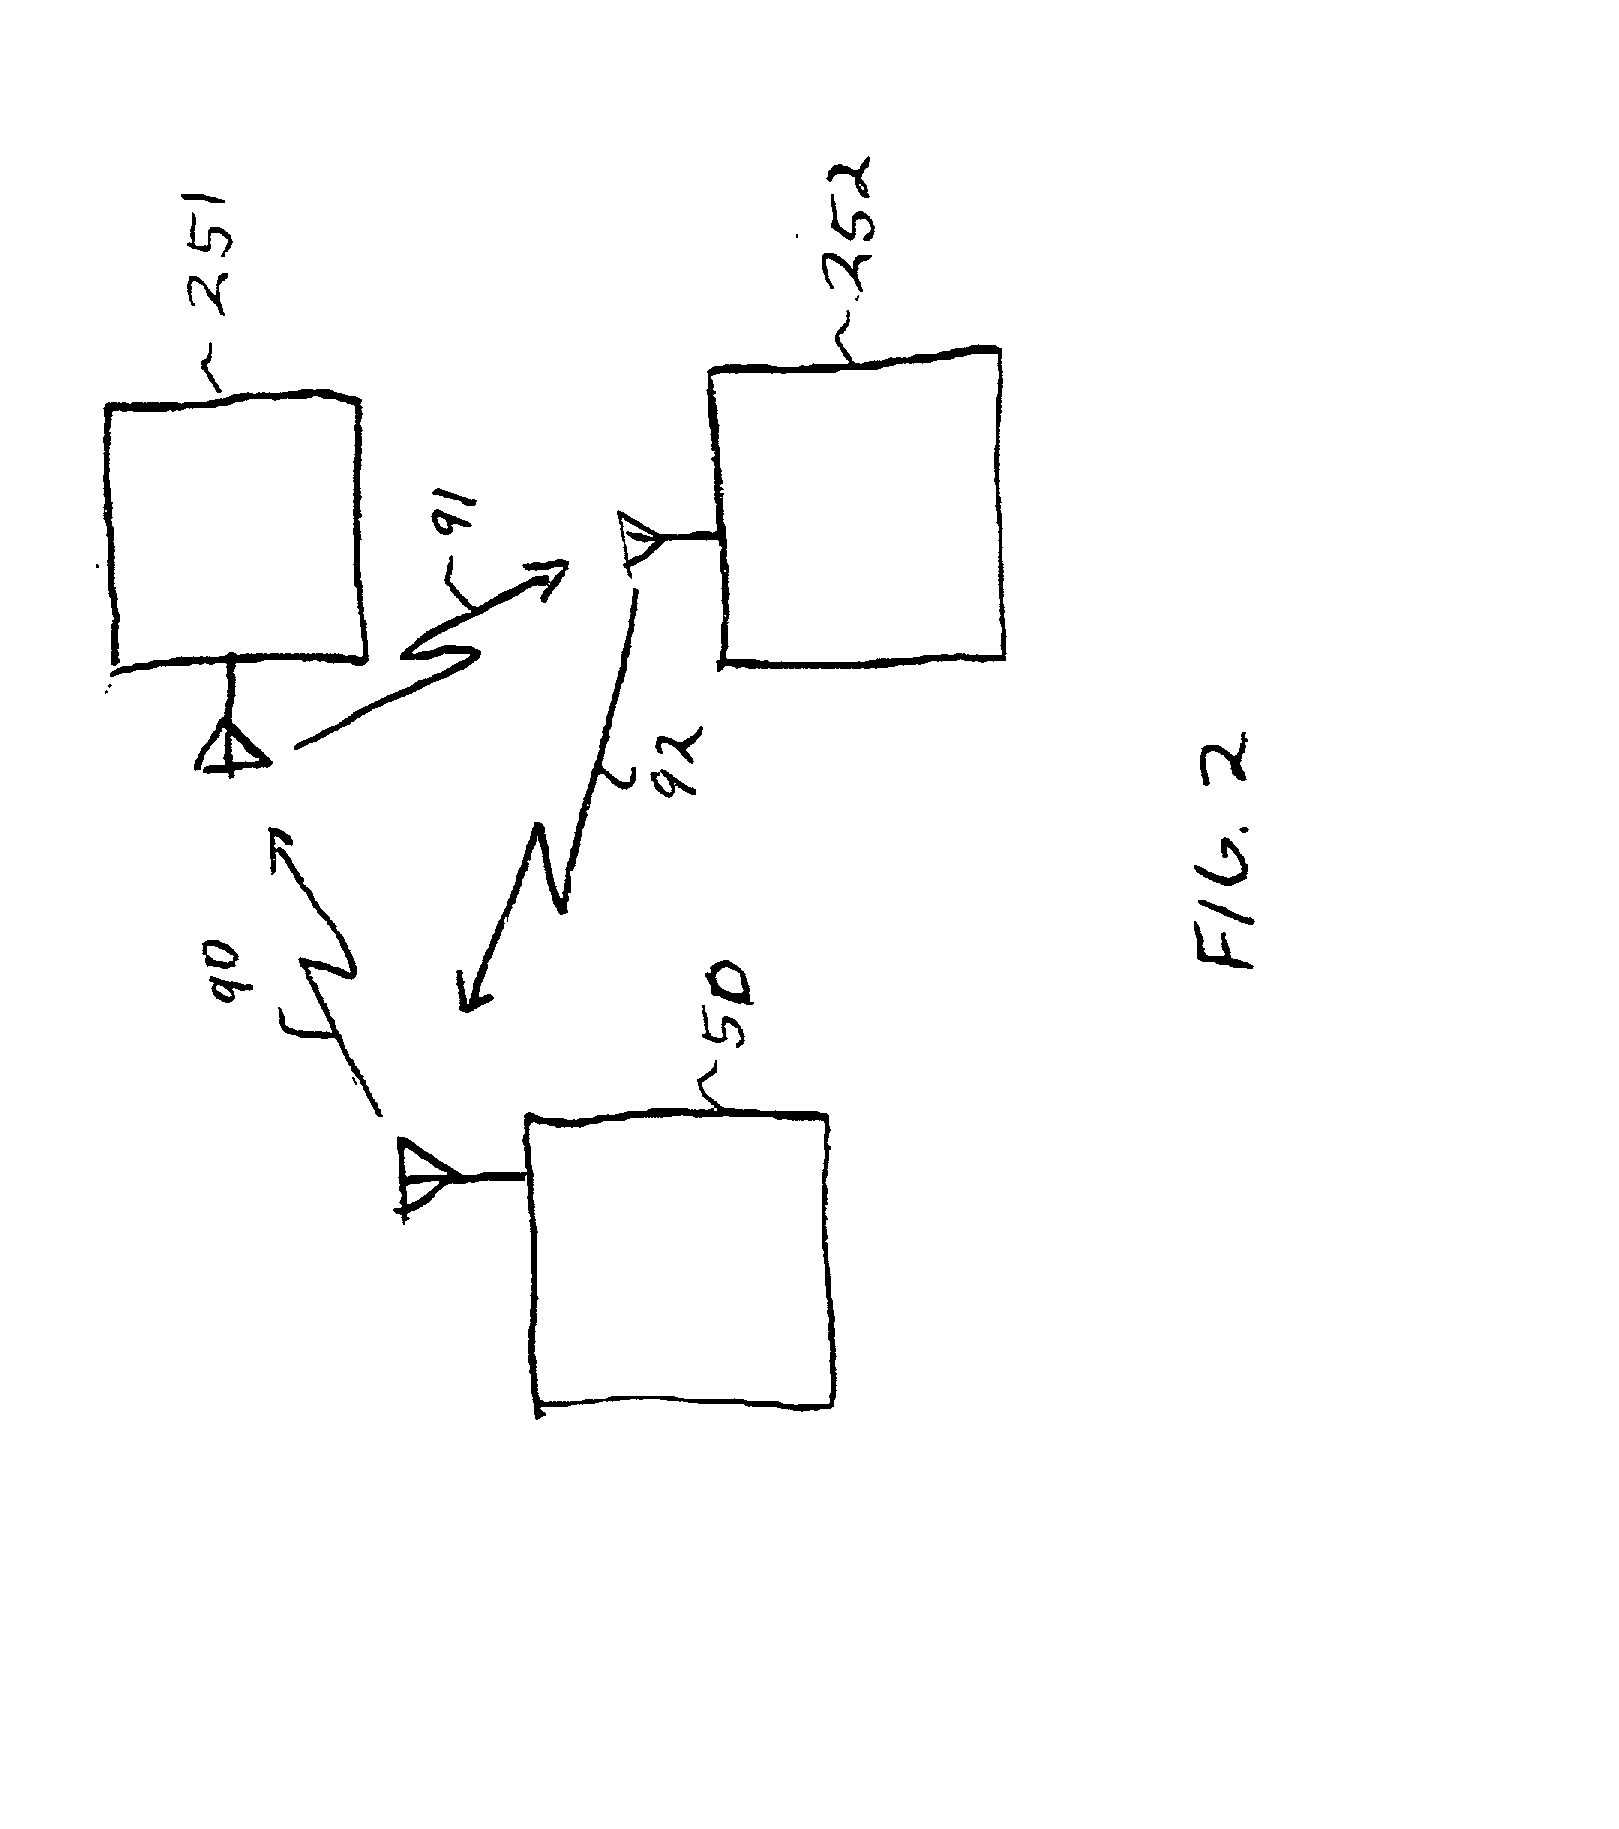 Wireless music device and method therefor